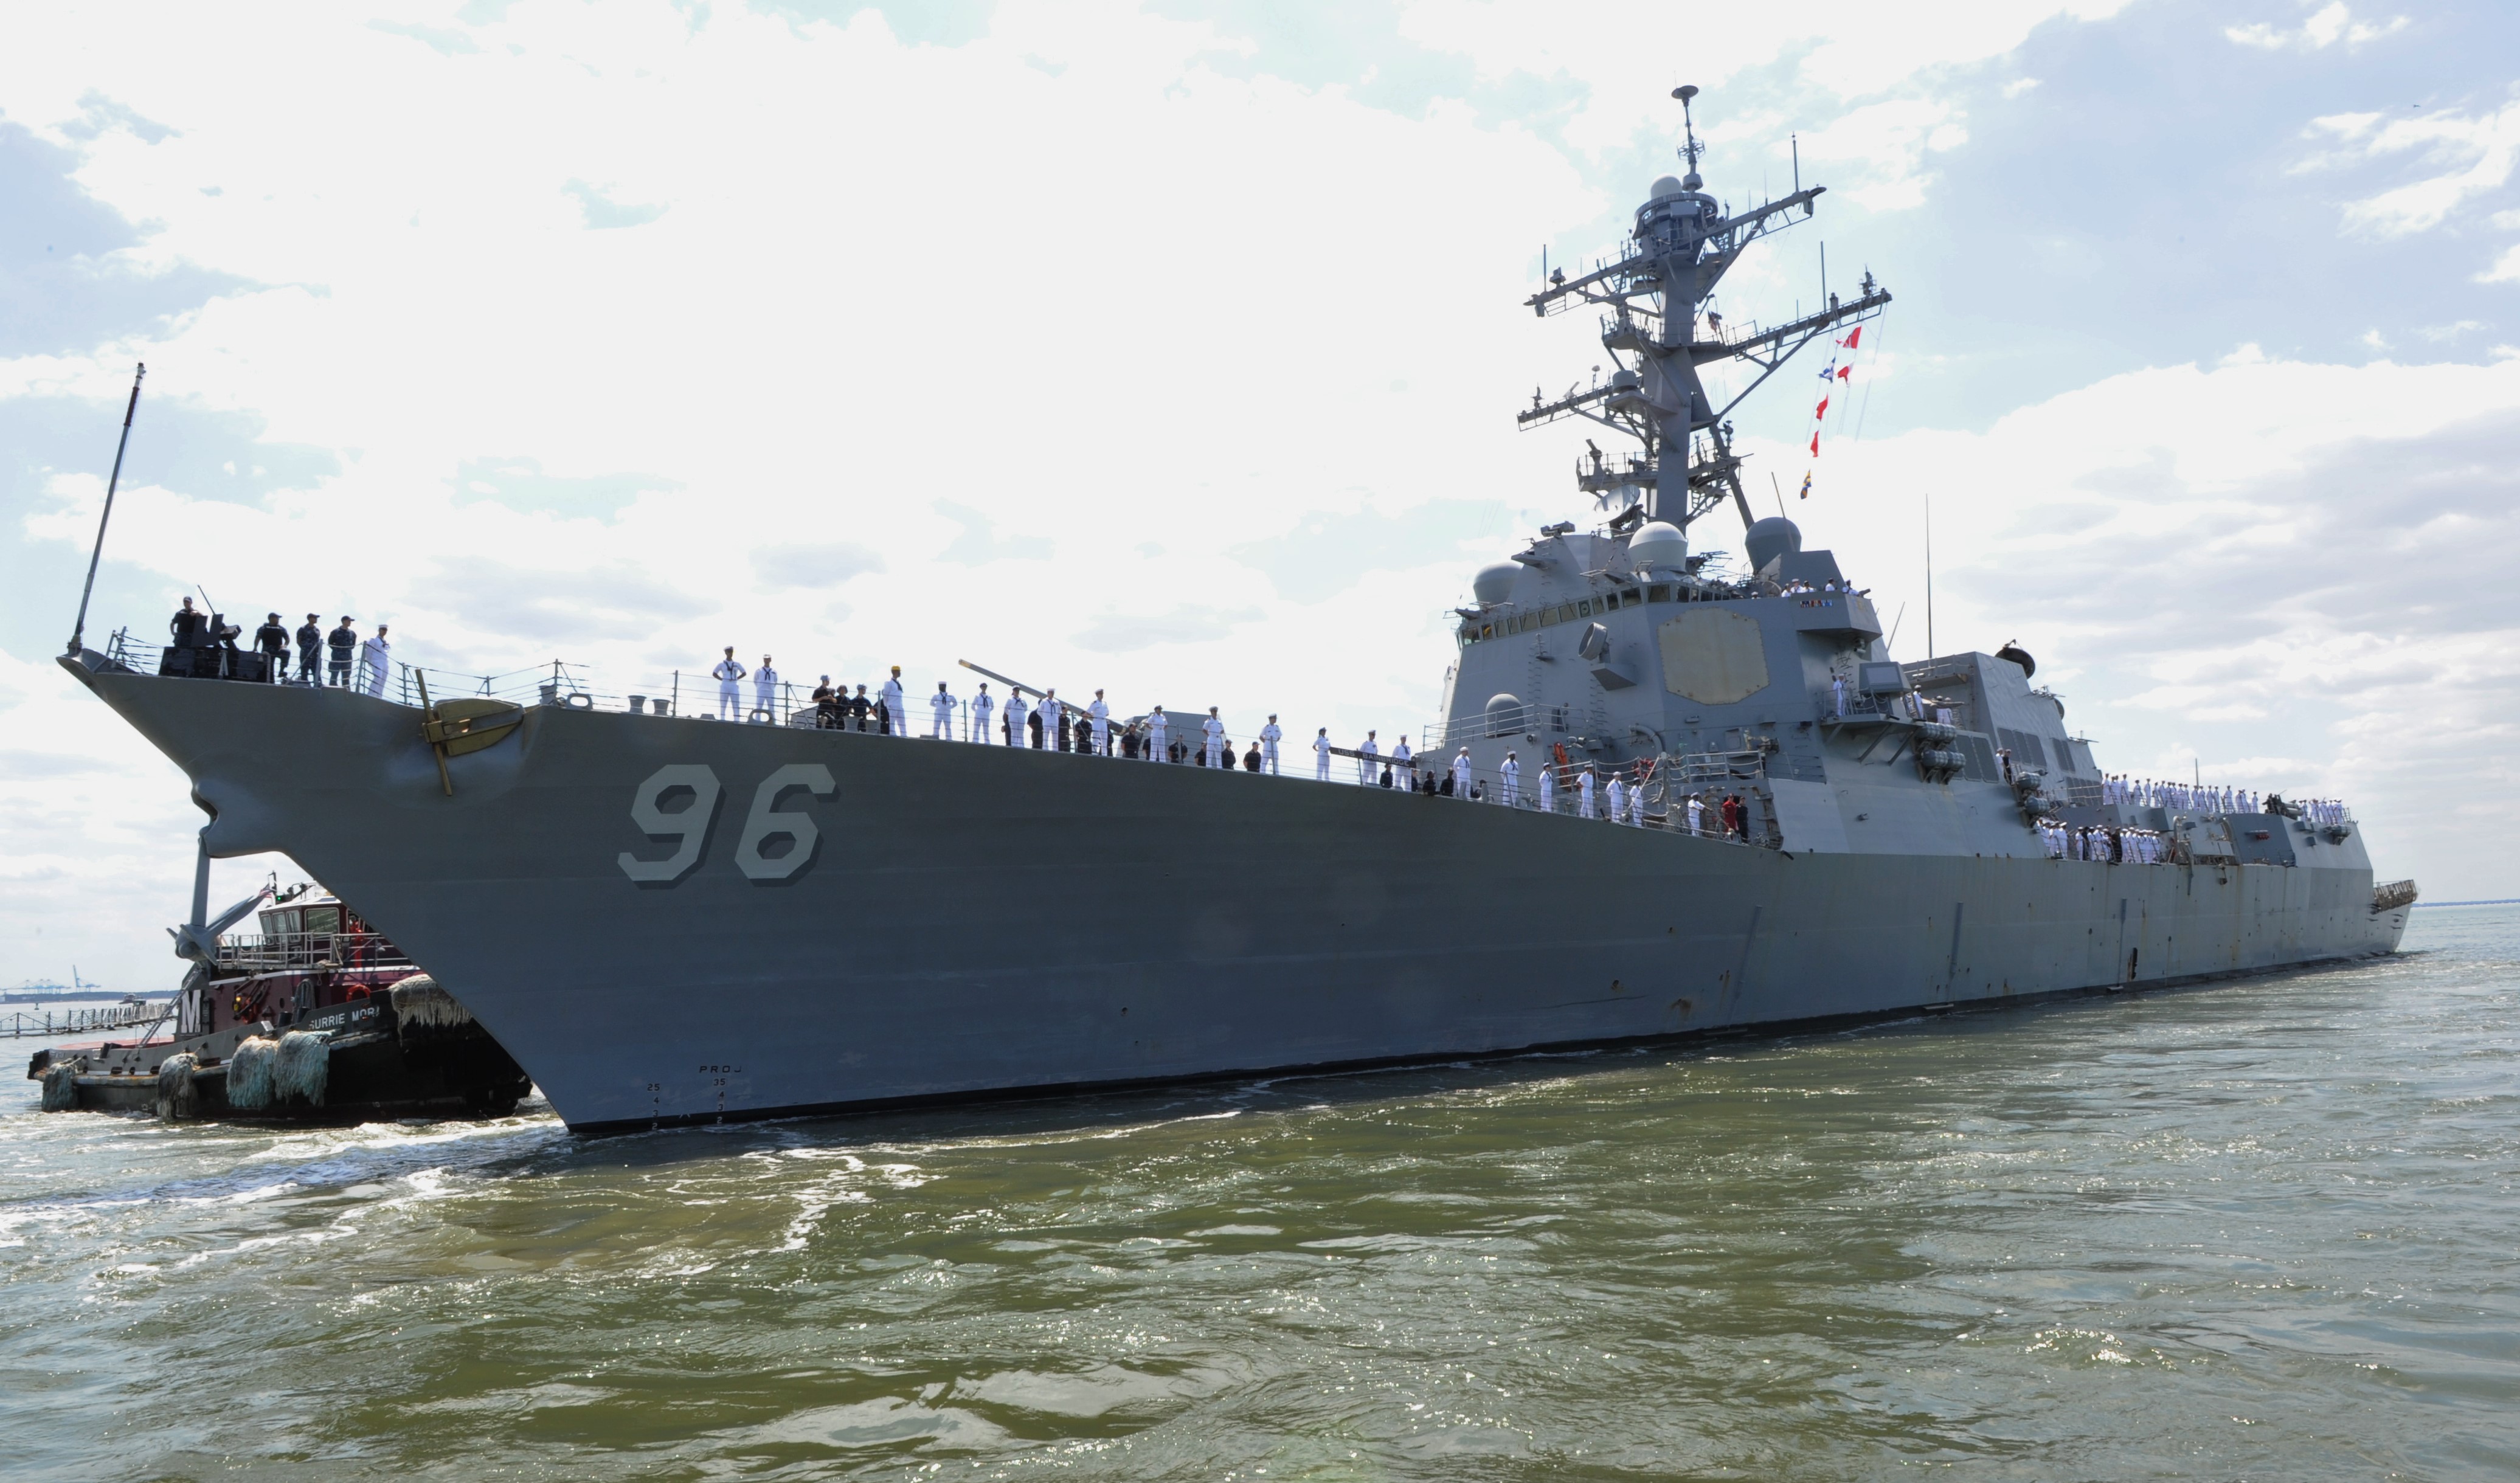 USS Bainbridge (DDG-96) departs Naval Station Norfolk on an independent deployment to the U.S. 5th Fleet area of responsibility on May 3, 2015. US Navy Photo 